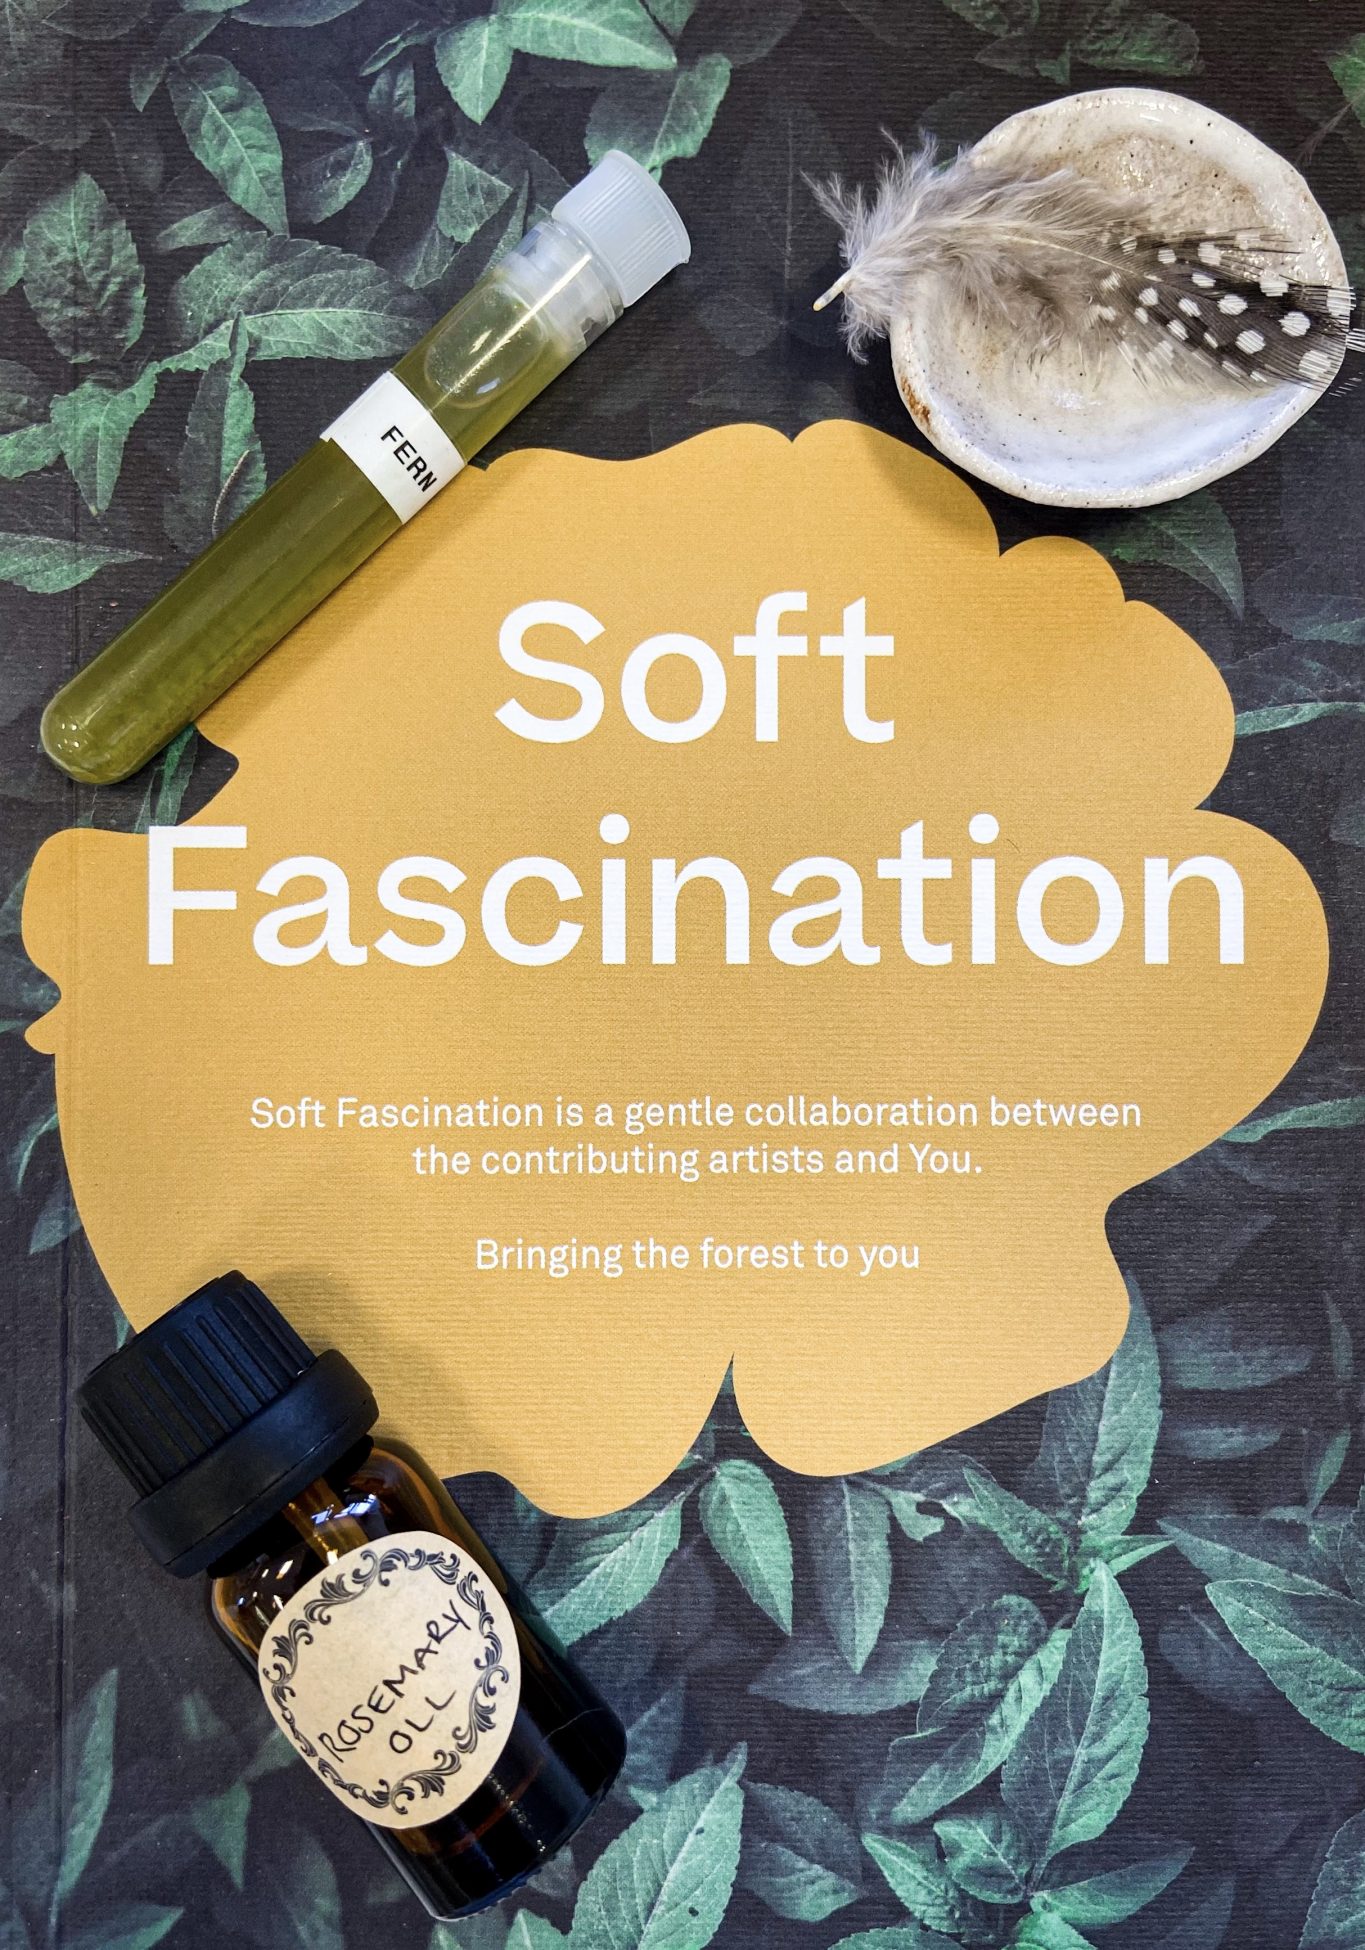 A photo of the soft fascination zine front cover, with a small bottle of rosemary oil, a small tube of natural green ink and a feather lying on top.